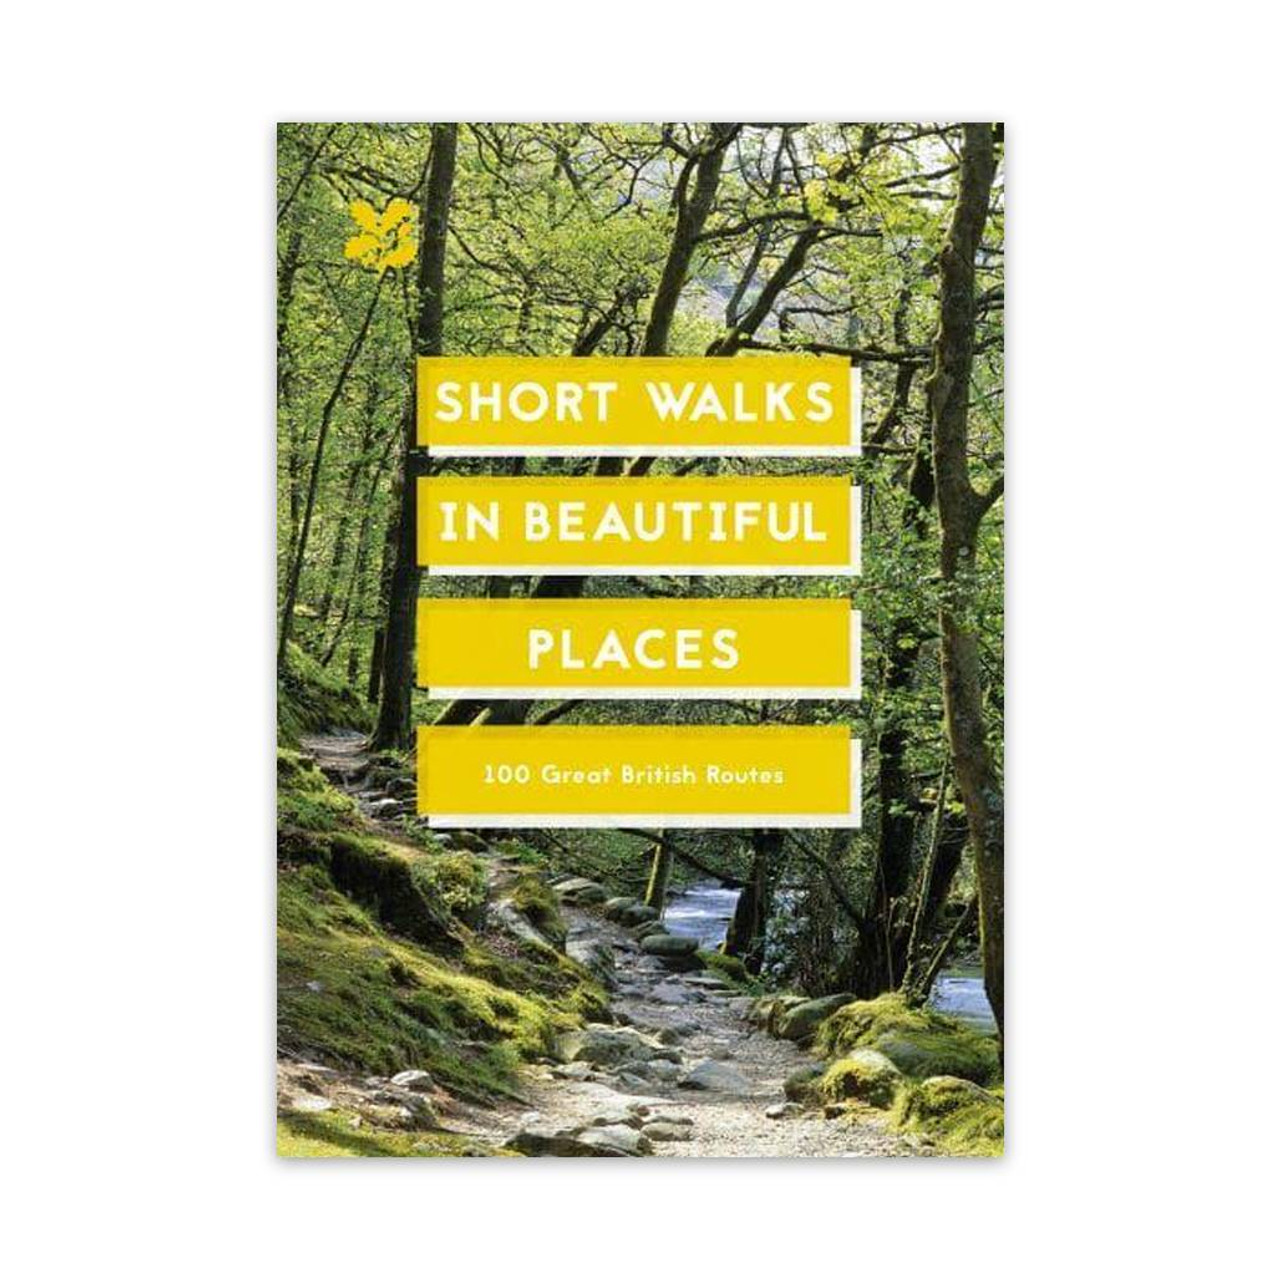 Short Walks In Beautiful Places: 100 Great British Routes